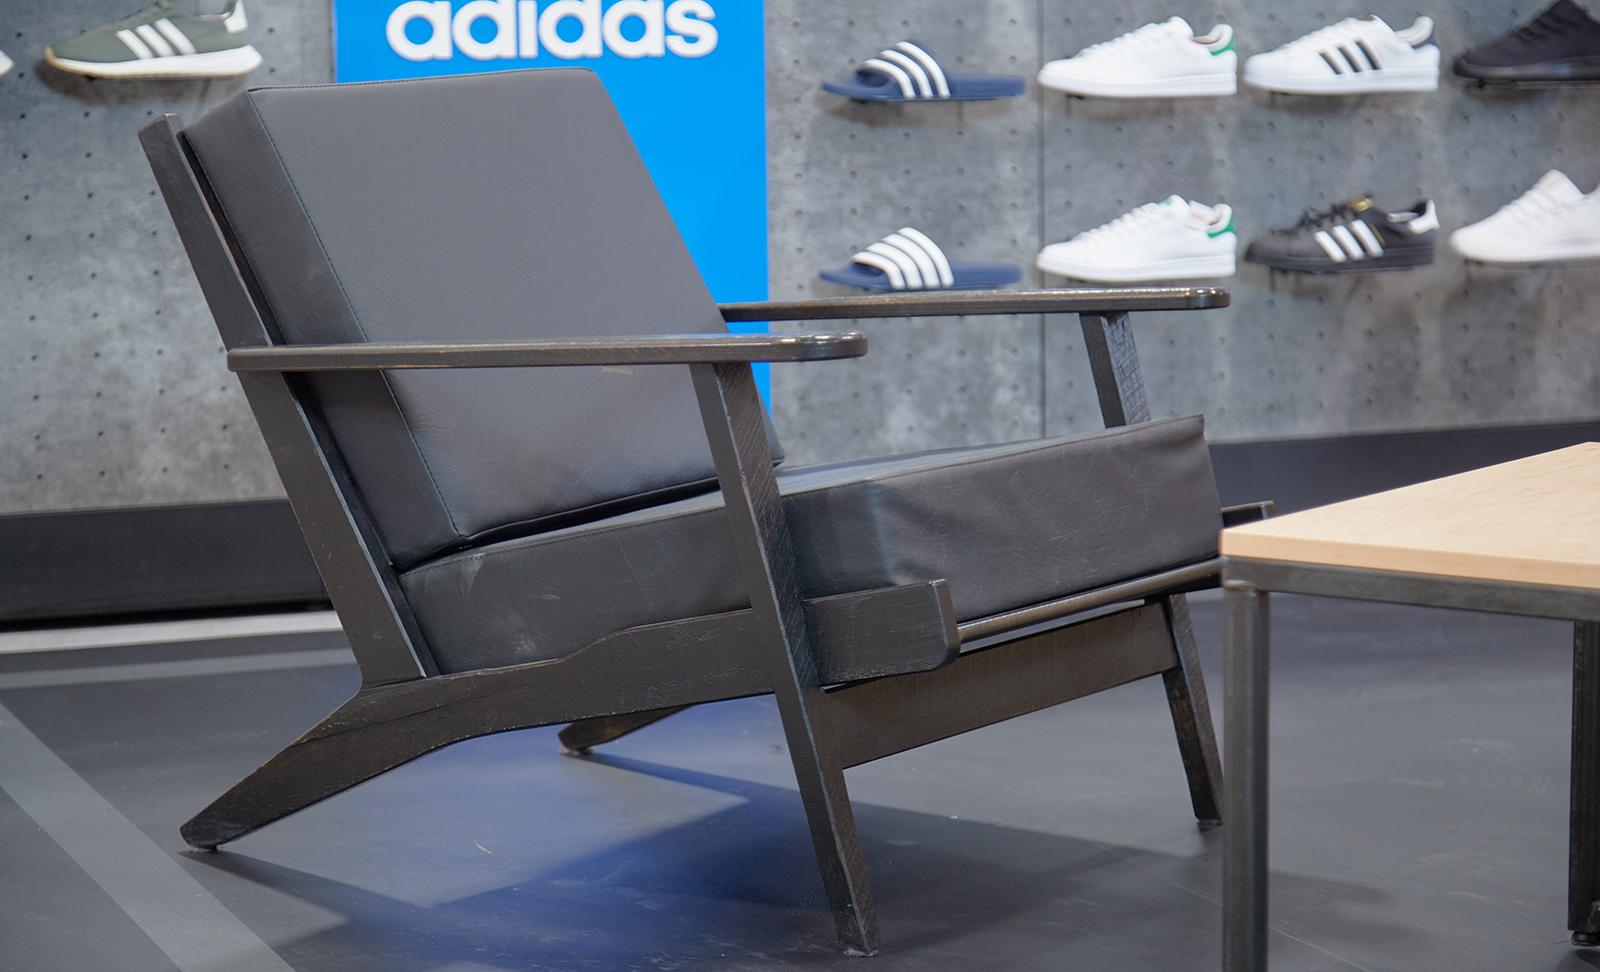 Custom built fixtures lie within the adidas retail space.